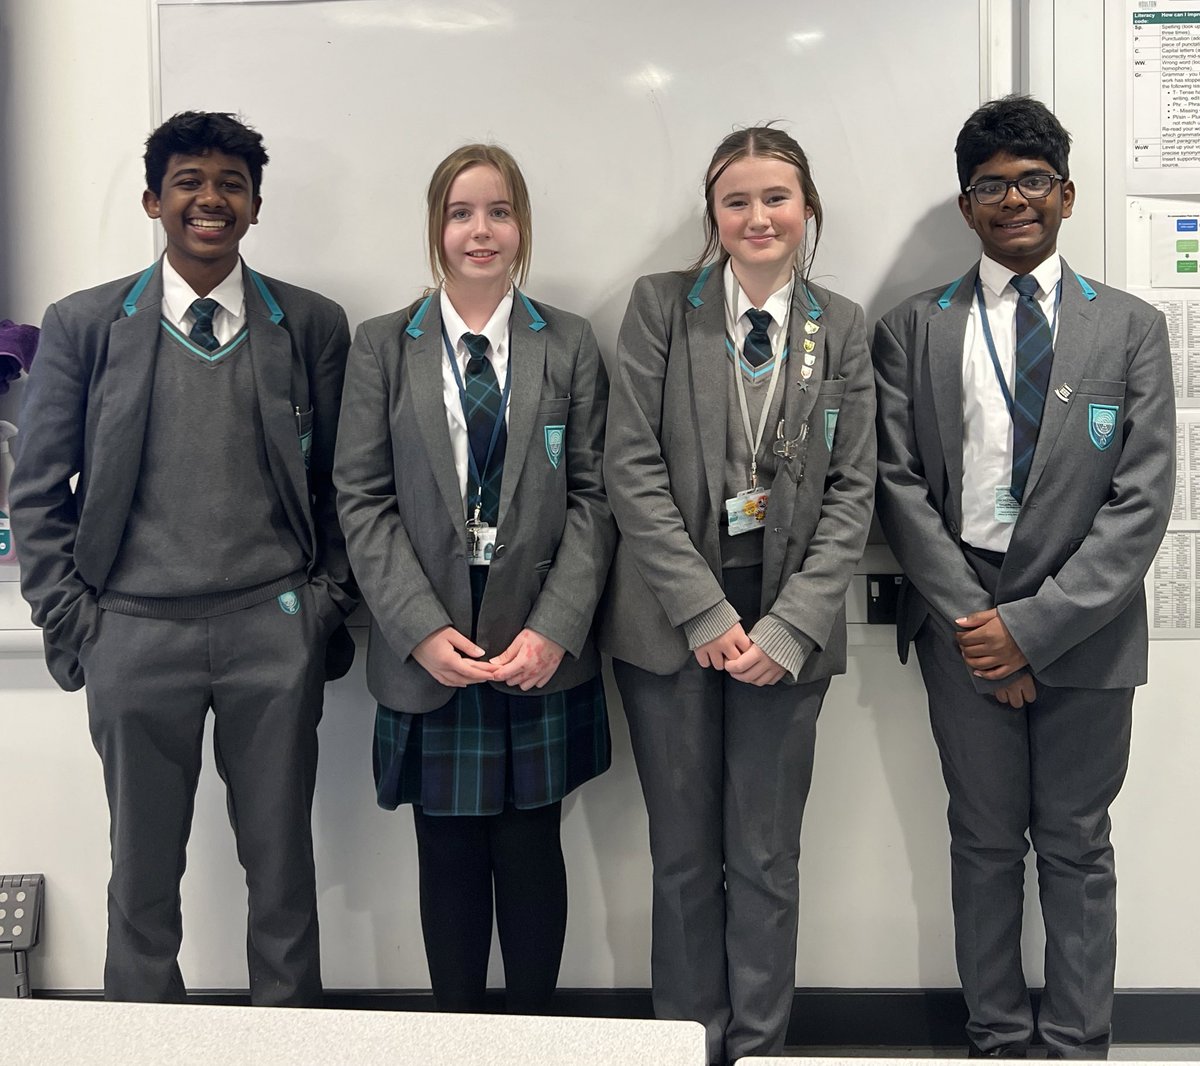 Well done to our Mathletes who took part in @UKMathsTrust Team Maths Challenge last week!